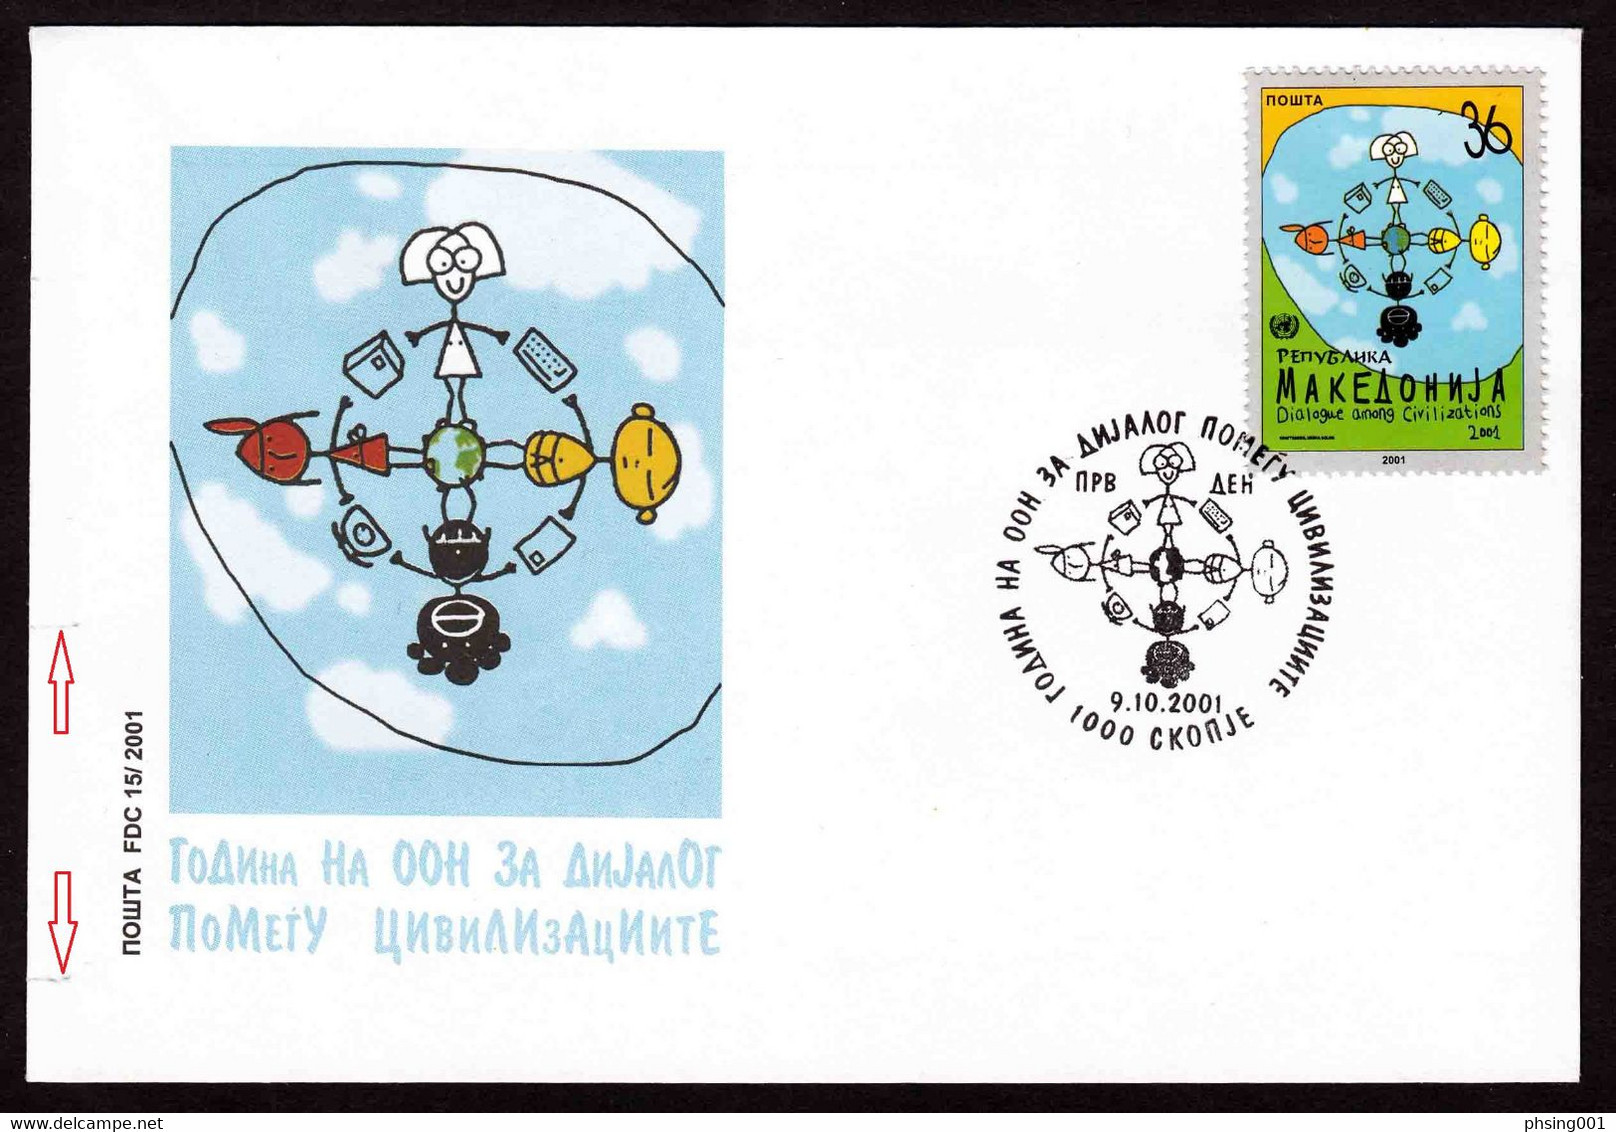 Macedonia 2001 Dialog Among Civilization Dialogue Joint Issue, FDC - Emisiones Comunes